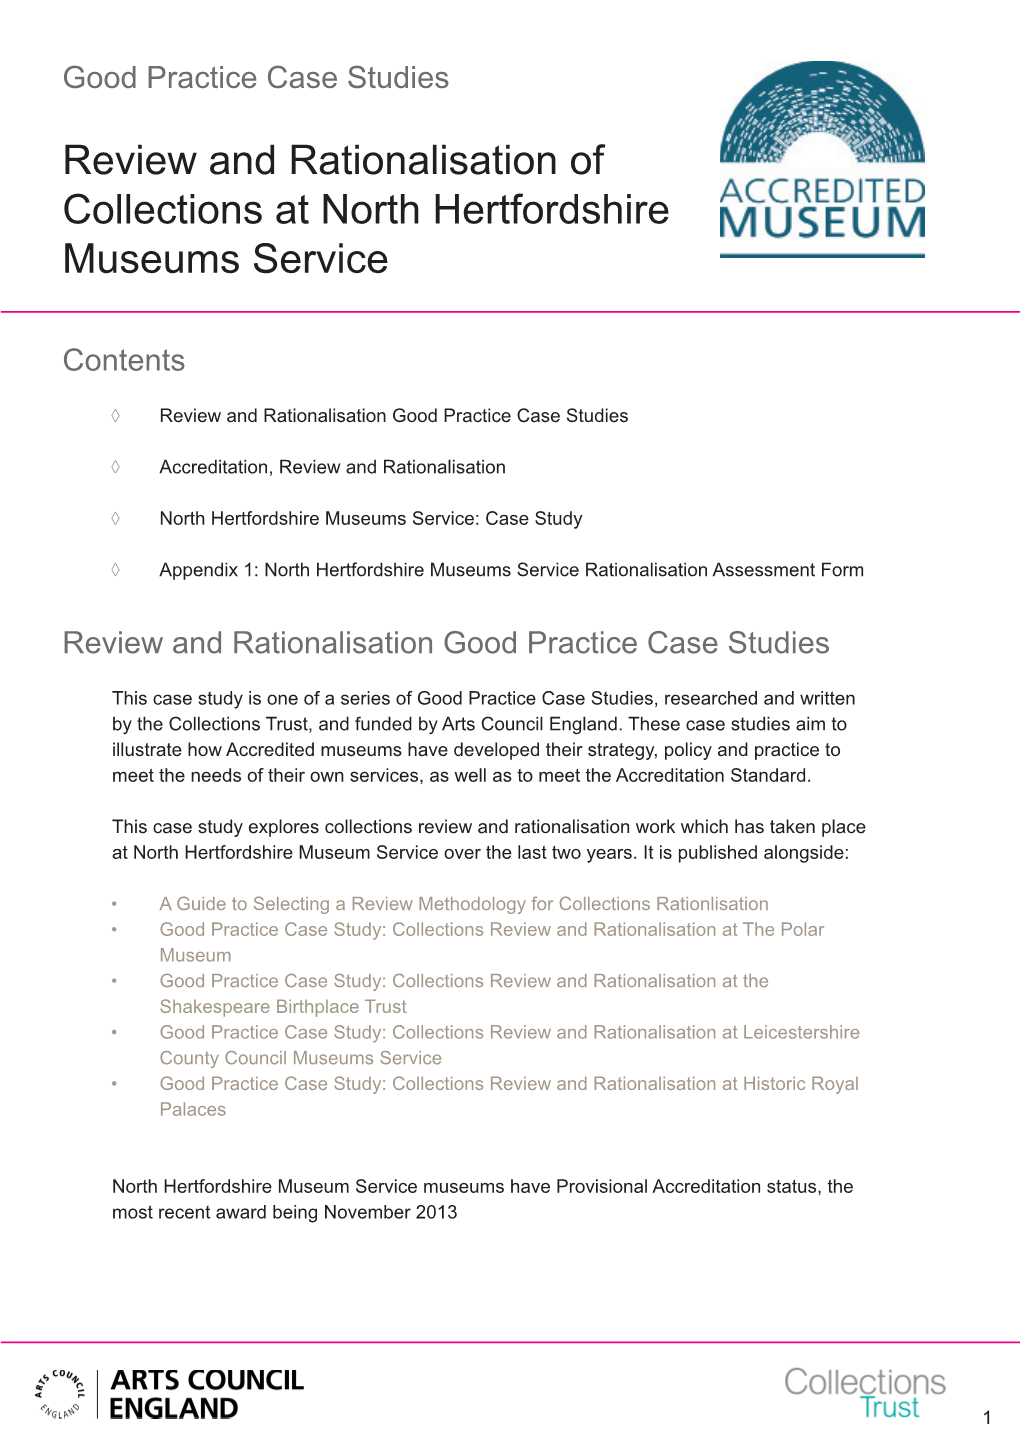 Review and Rationalisation of Collections at North Hertfordshire Museums Service